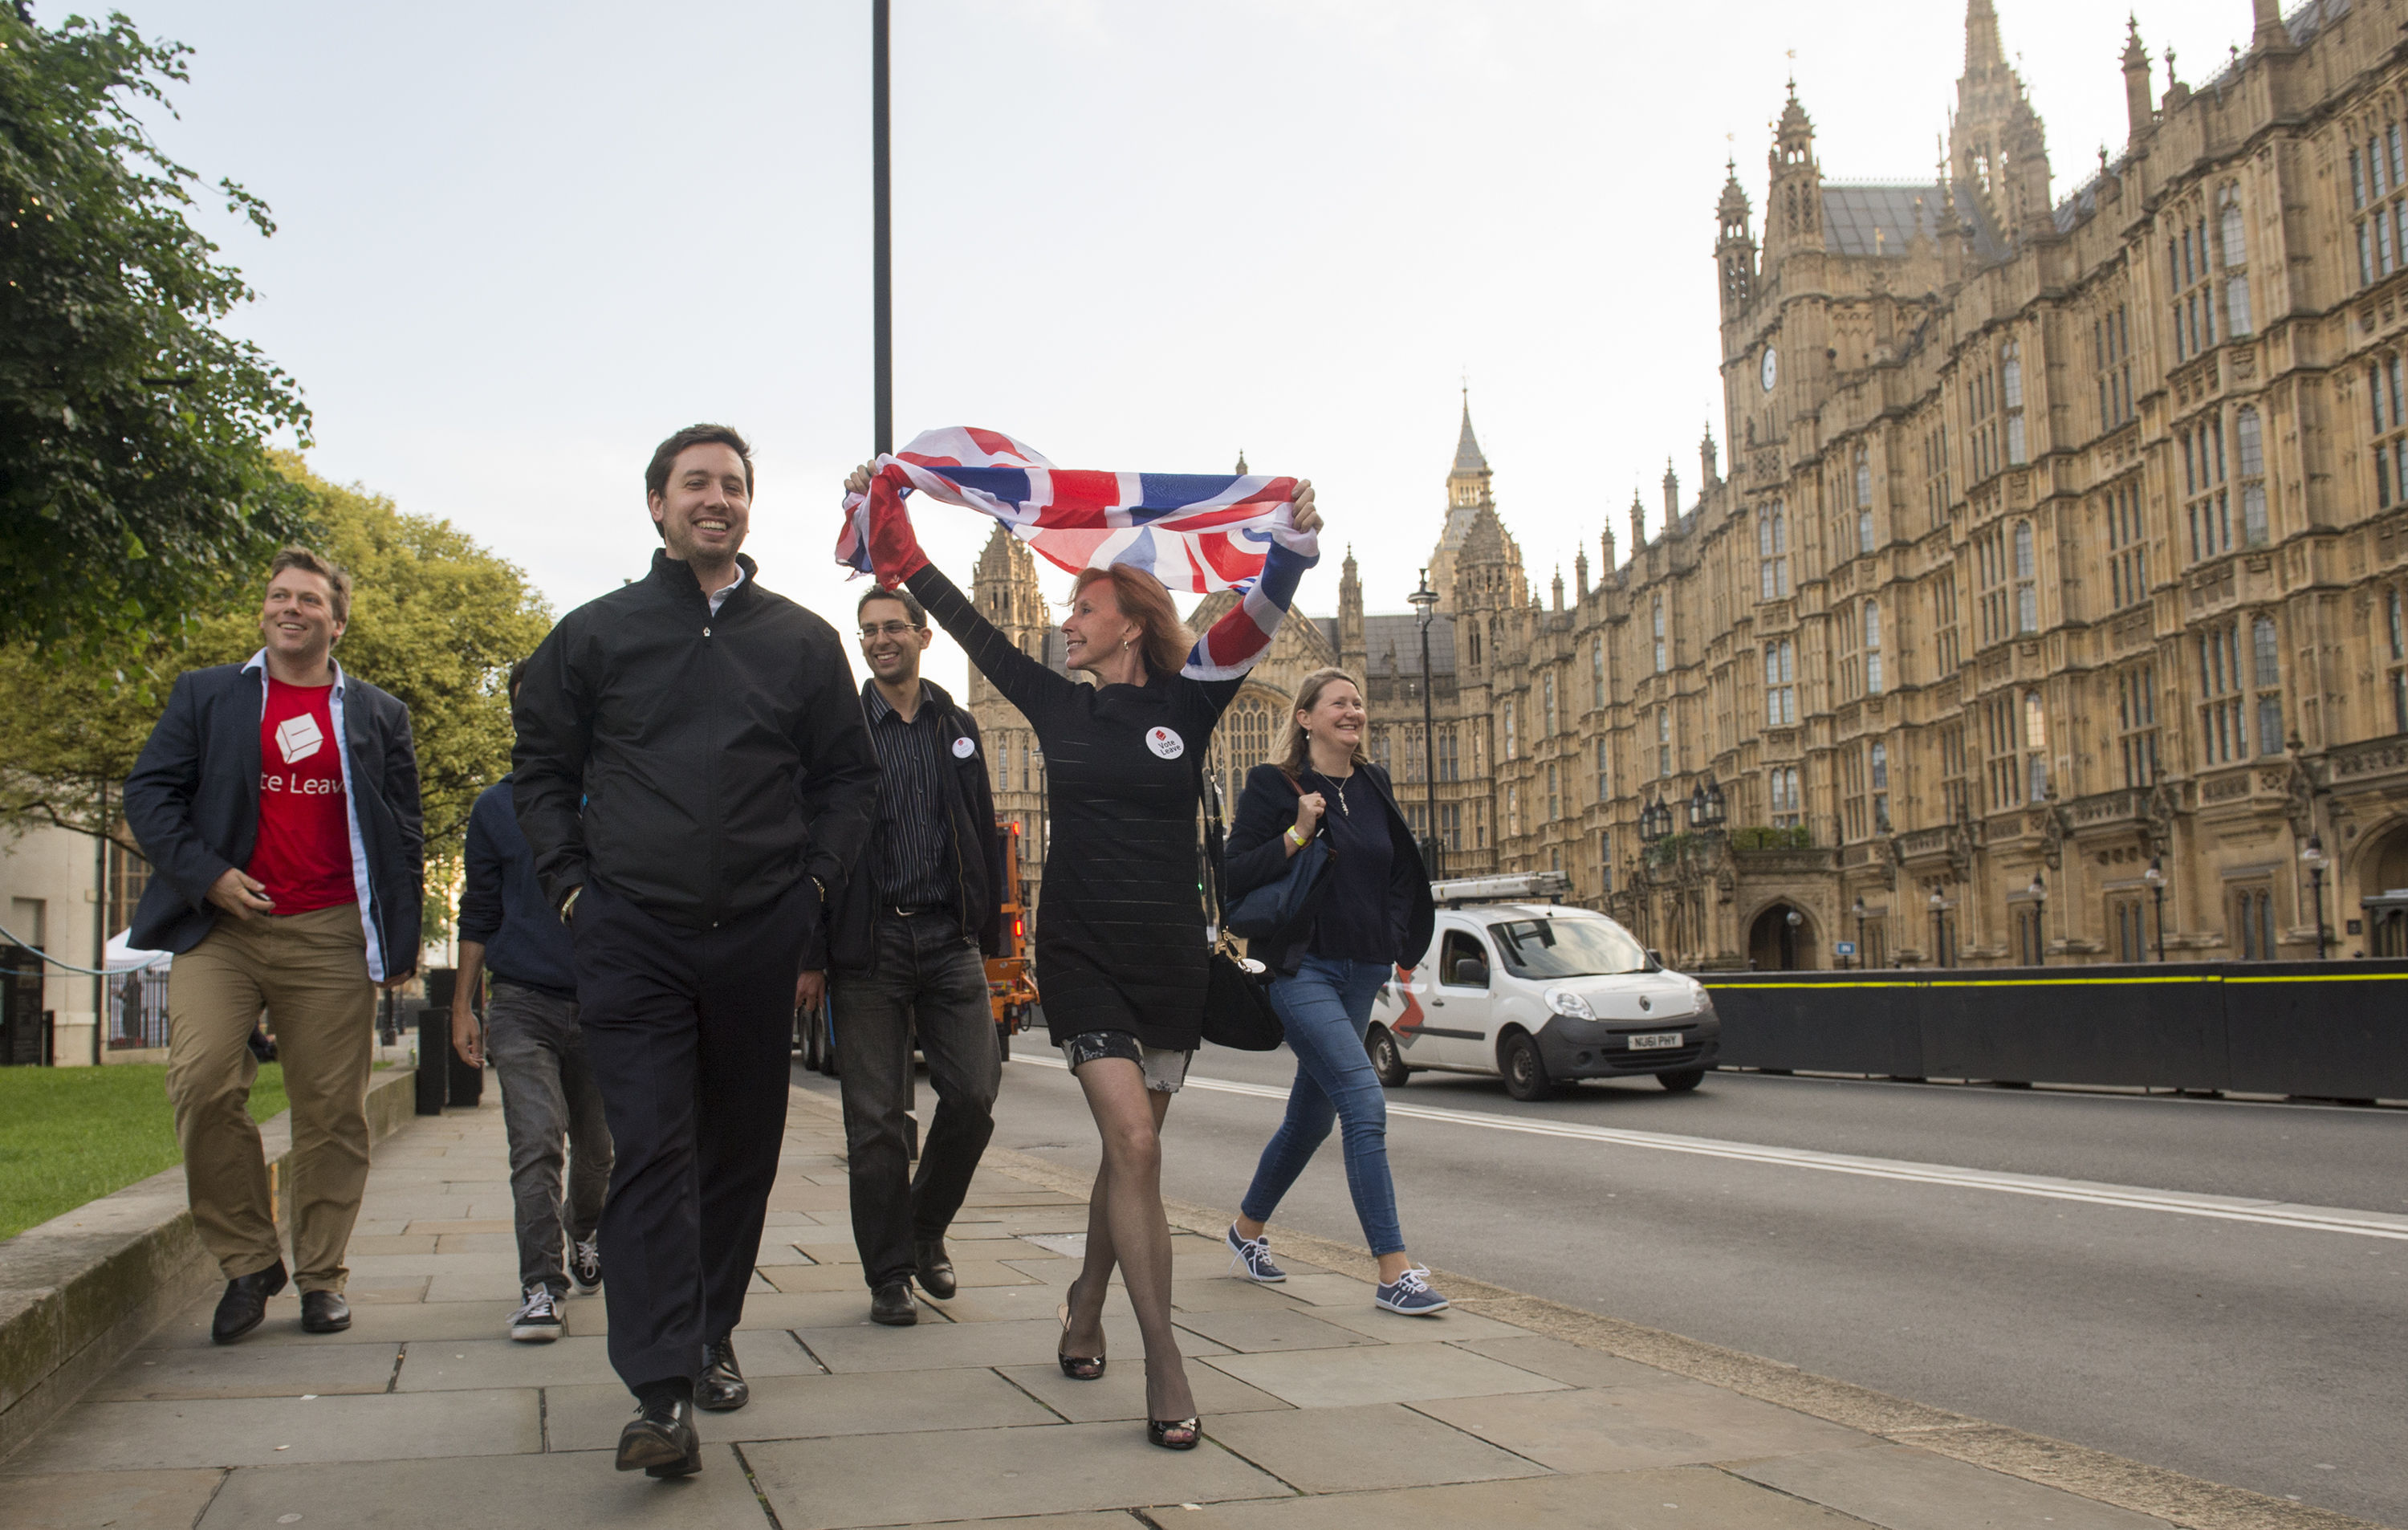 Leave supporters celebrate opposite the Houses of Parliament.